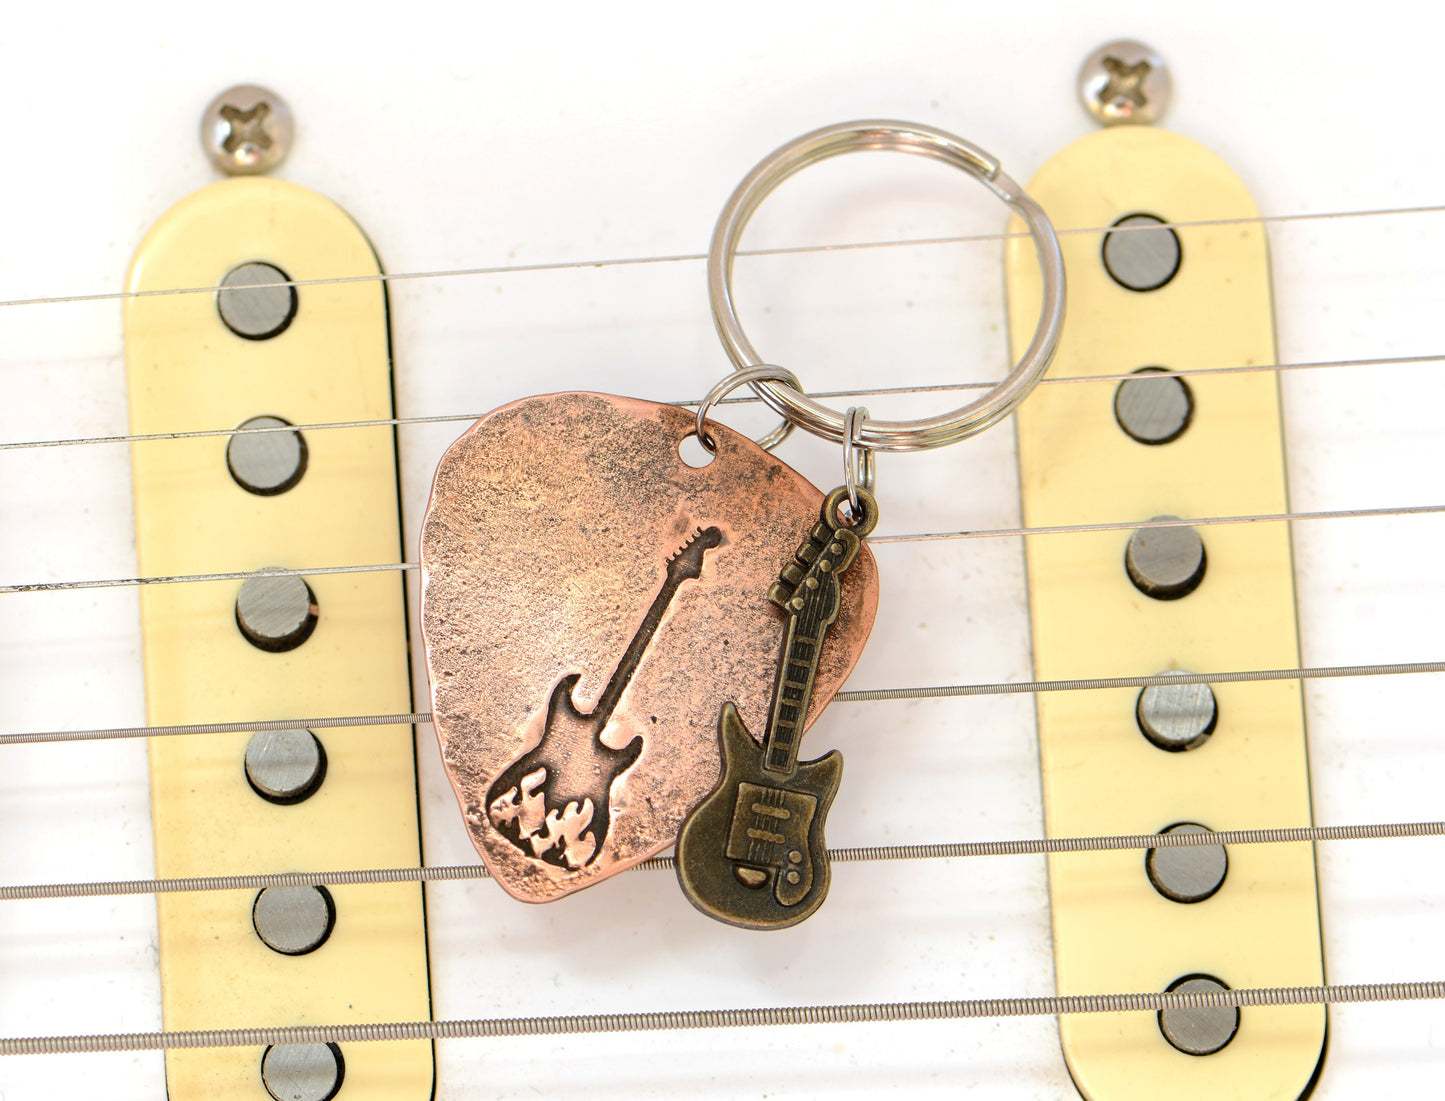 Flaming Design on a Guitar Guitar Pick Keychain